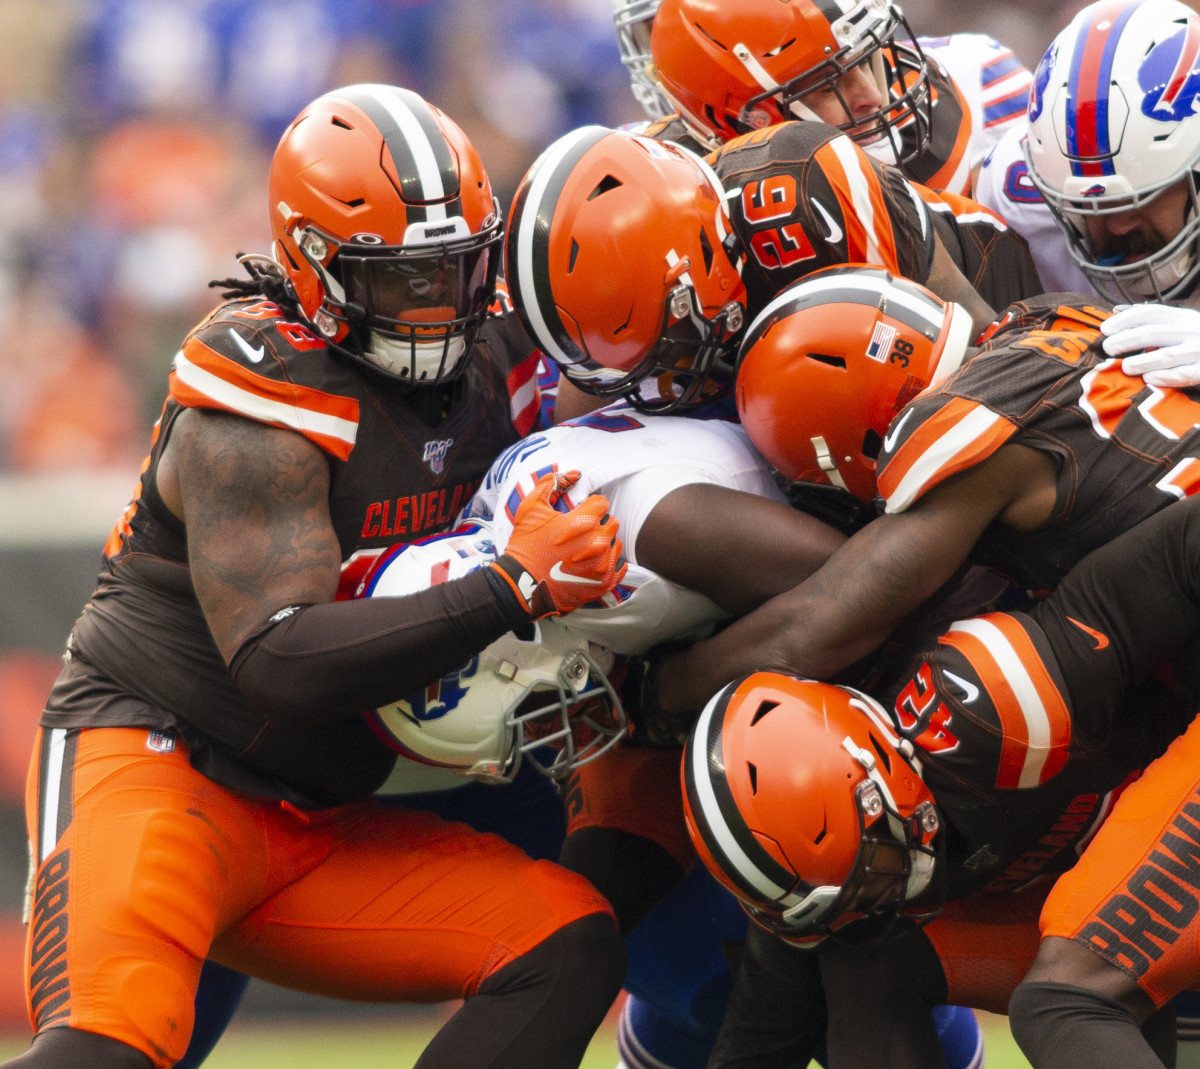 Nov 10, 2019; Cleveland, OH, USA; Buffalo Bills running back Devin Singletary (26) gets tackled by the Cleveland Browns defense during the second quarter at FirstEnergy Stadium. Mandatory Credit: Scott R. Galvin-USA TODAY Sports